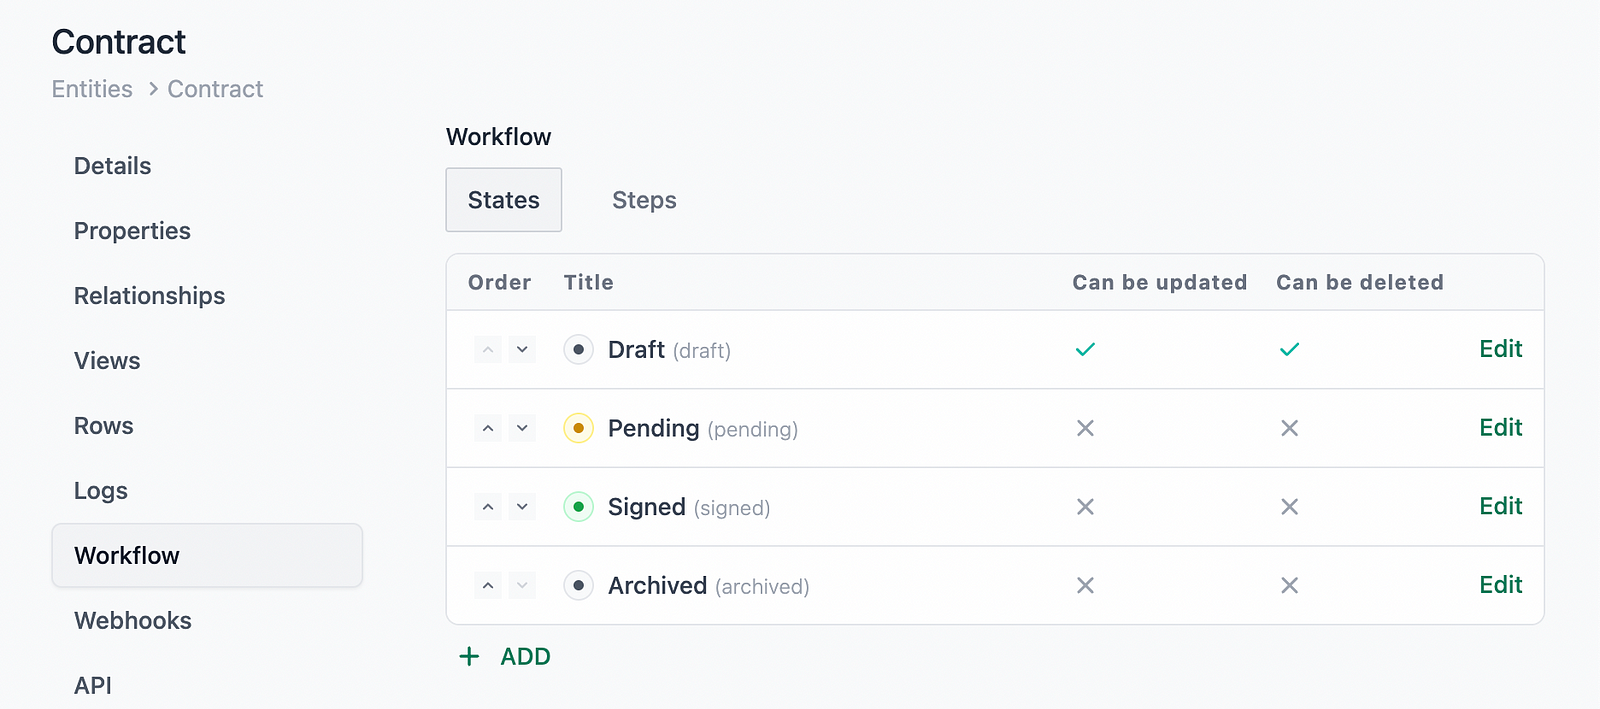 Contract Workflow States